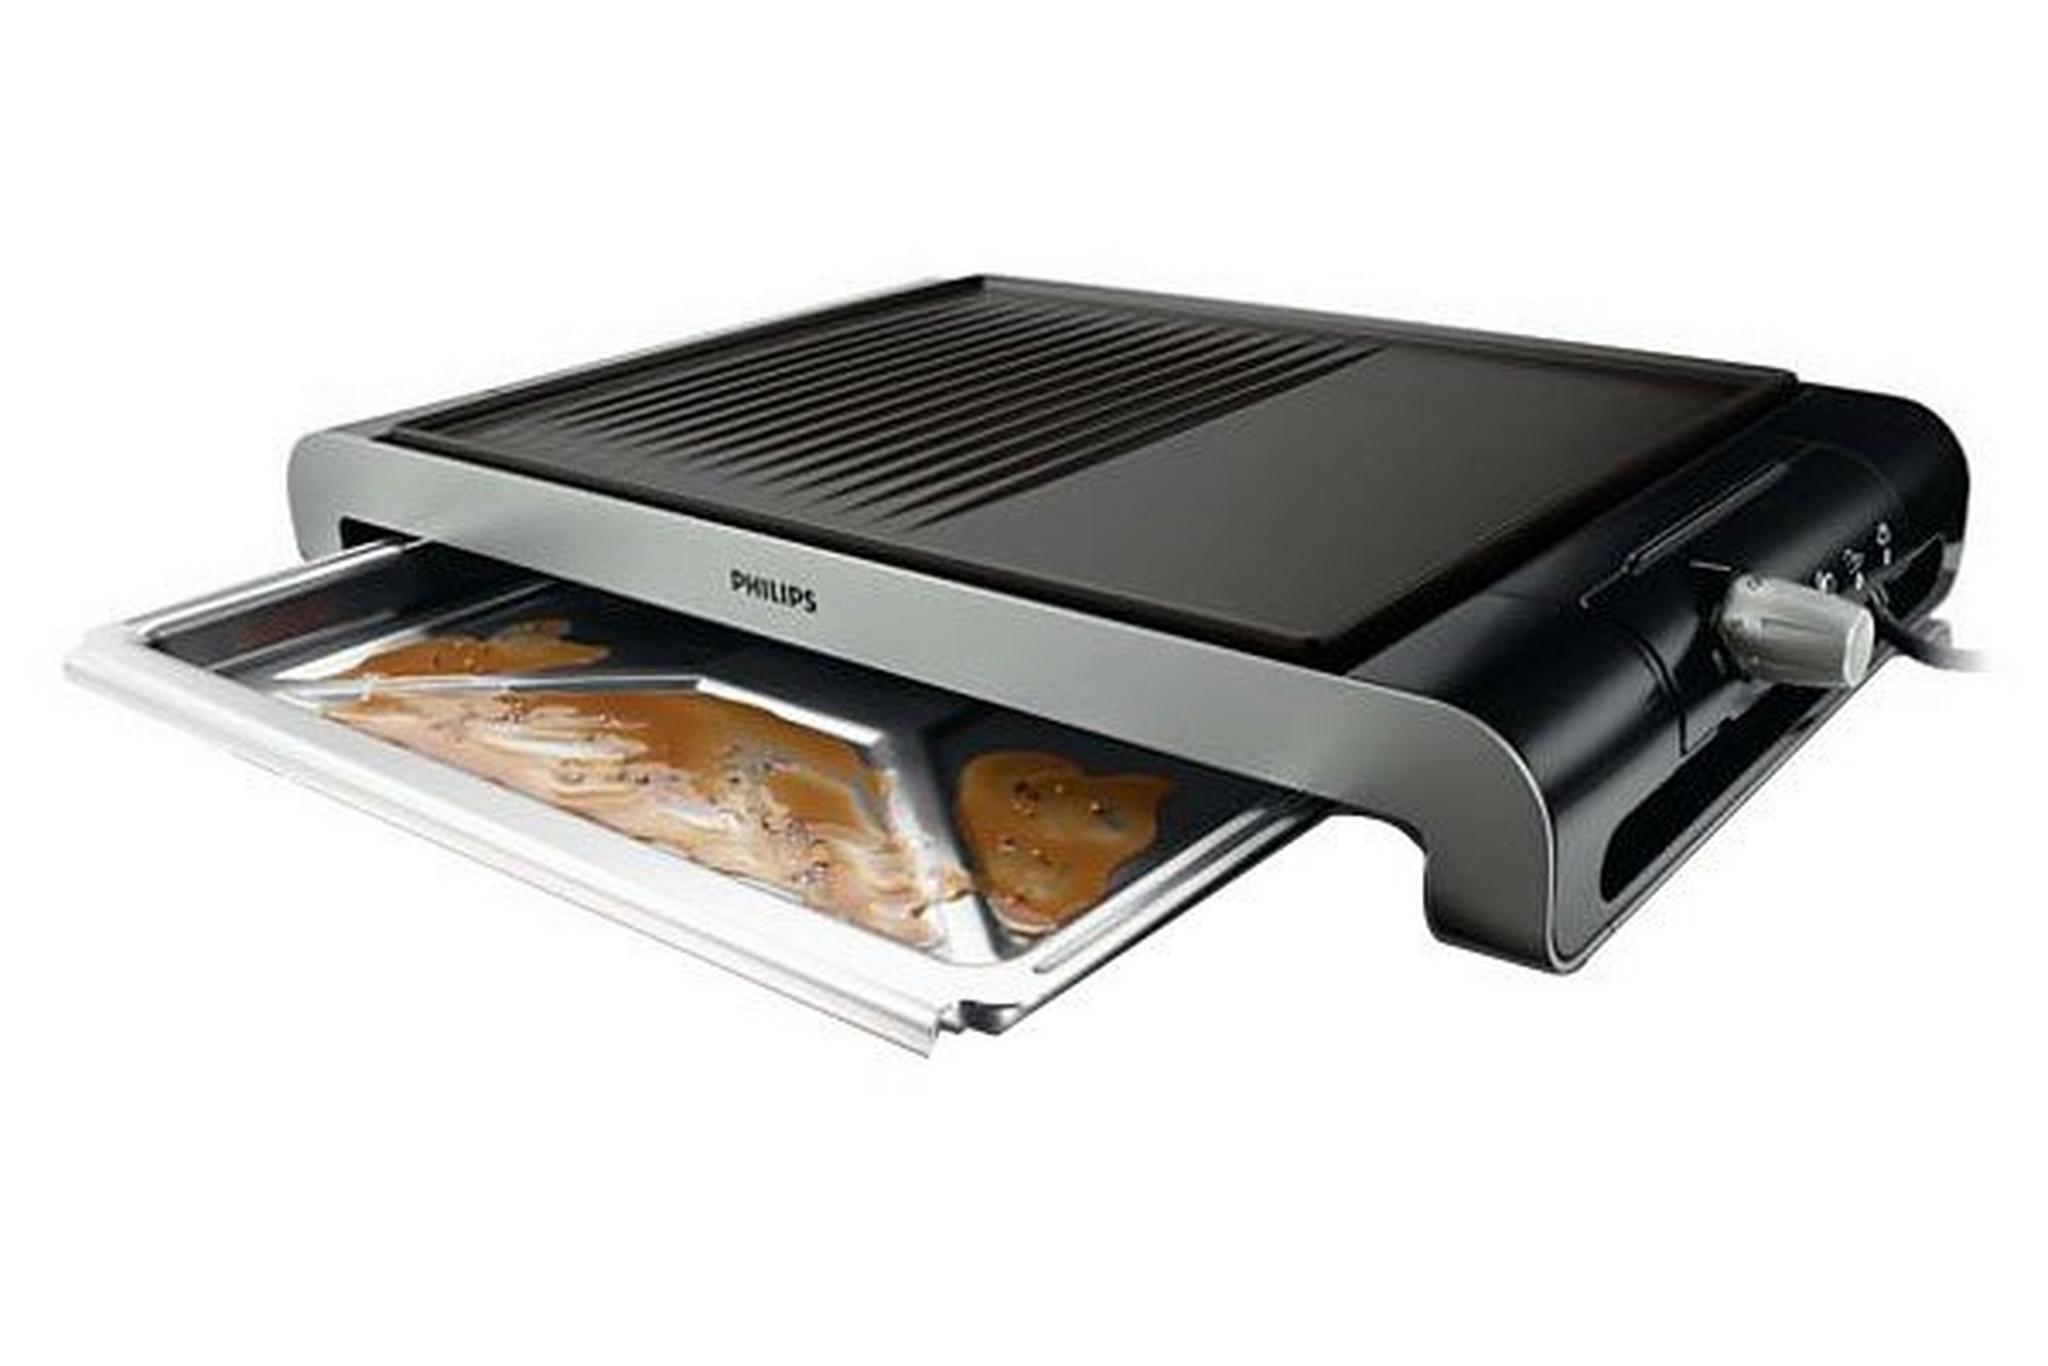 Philips 2300 Watts Table Grill with Adjustable Thermostat (HD4419/20) - Black